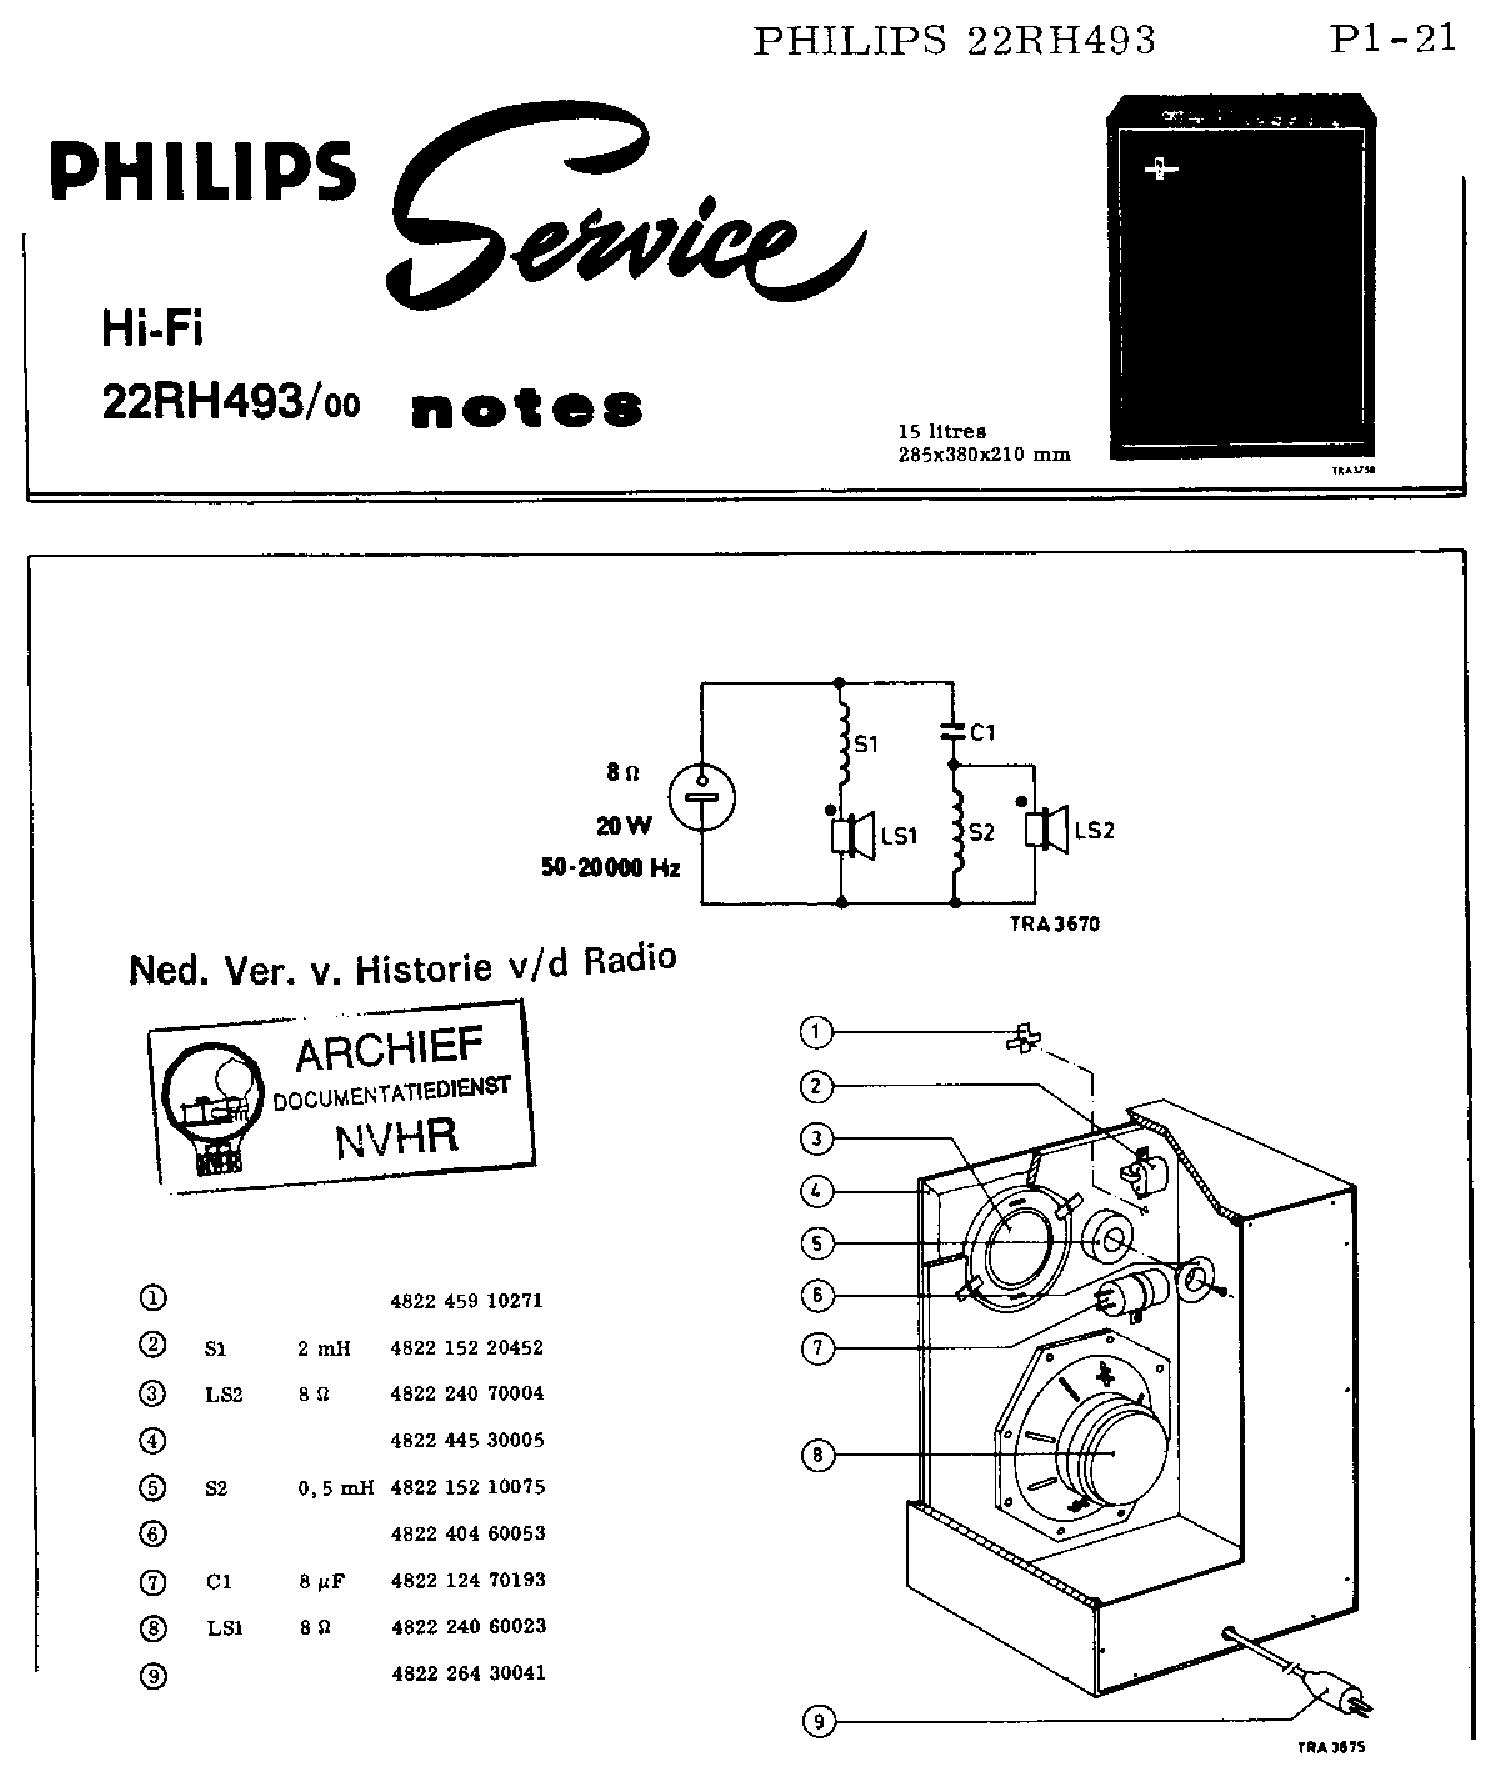 PHILIPS 22RH493-00 2-WAY LOUDSPEAKER SYSTEM SM service manual (1st page)